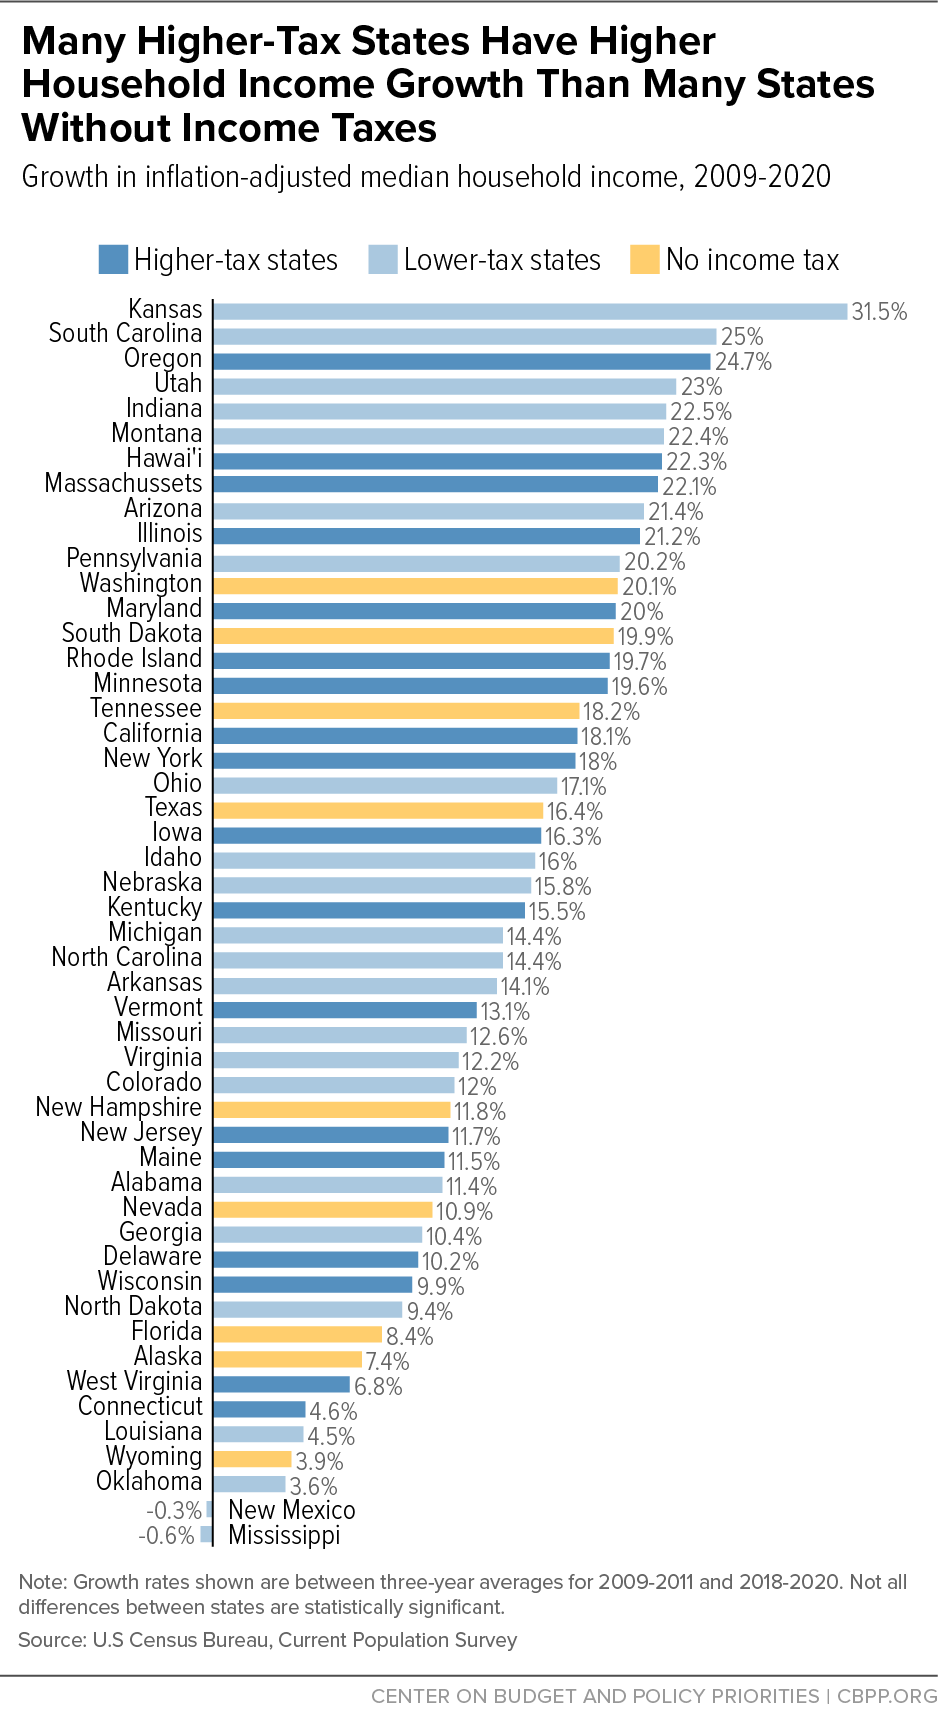 Many Higher-Tax States Have Higher Household Income Growth Than Many States Without Income Taxes